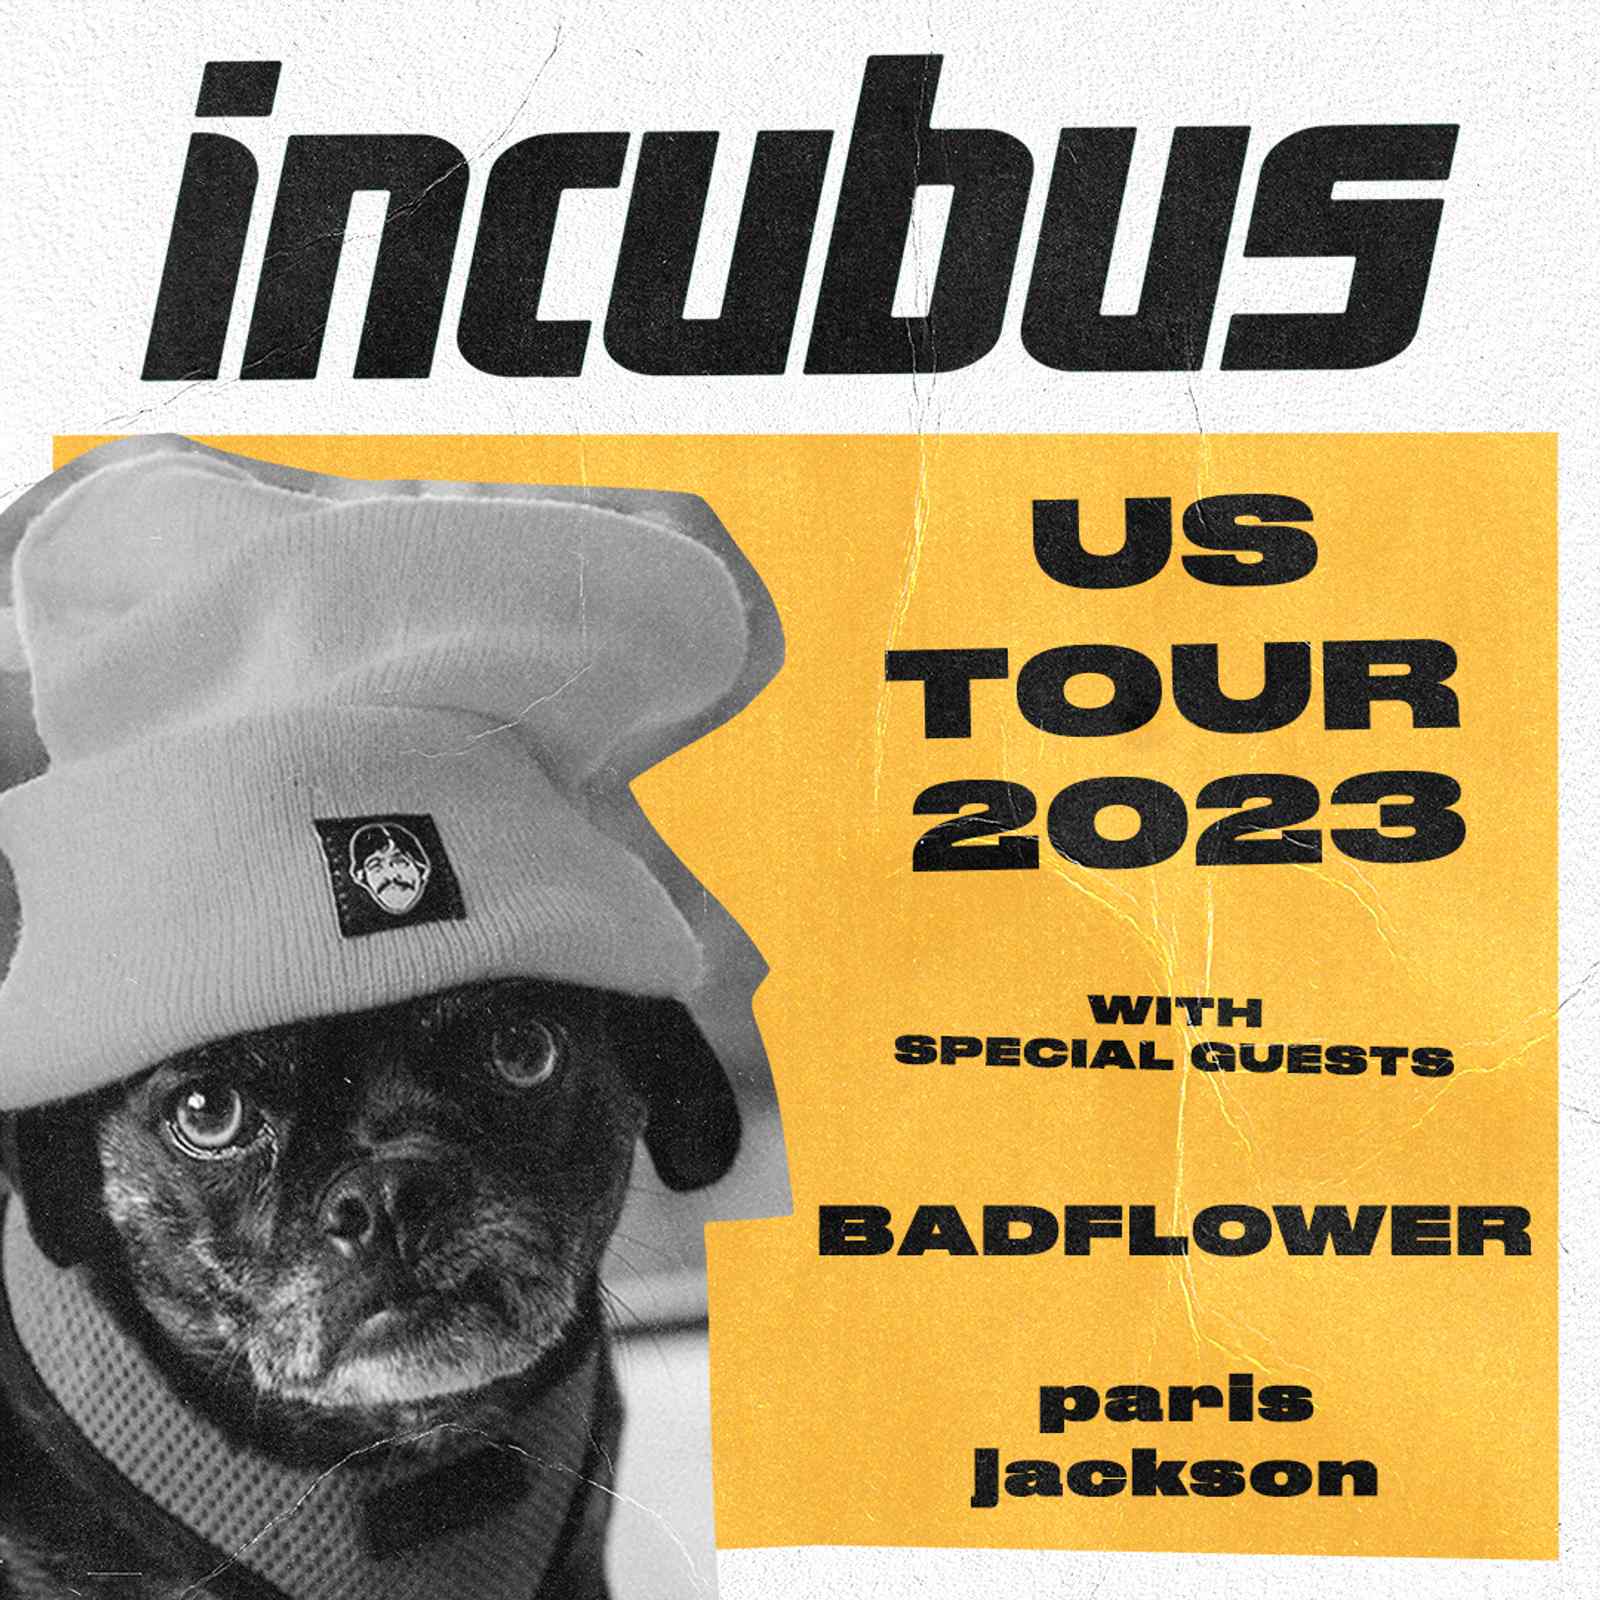 Incubus with special guests Badflower and paris jackson Franklin. Tenn..